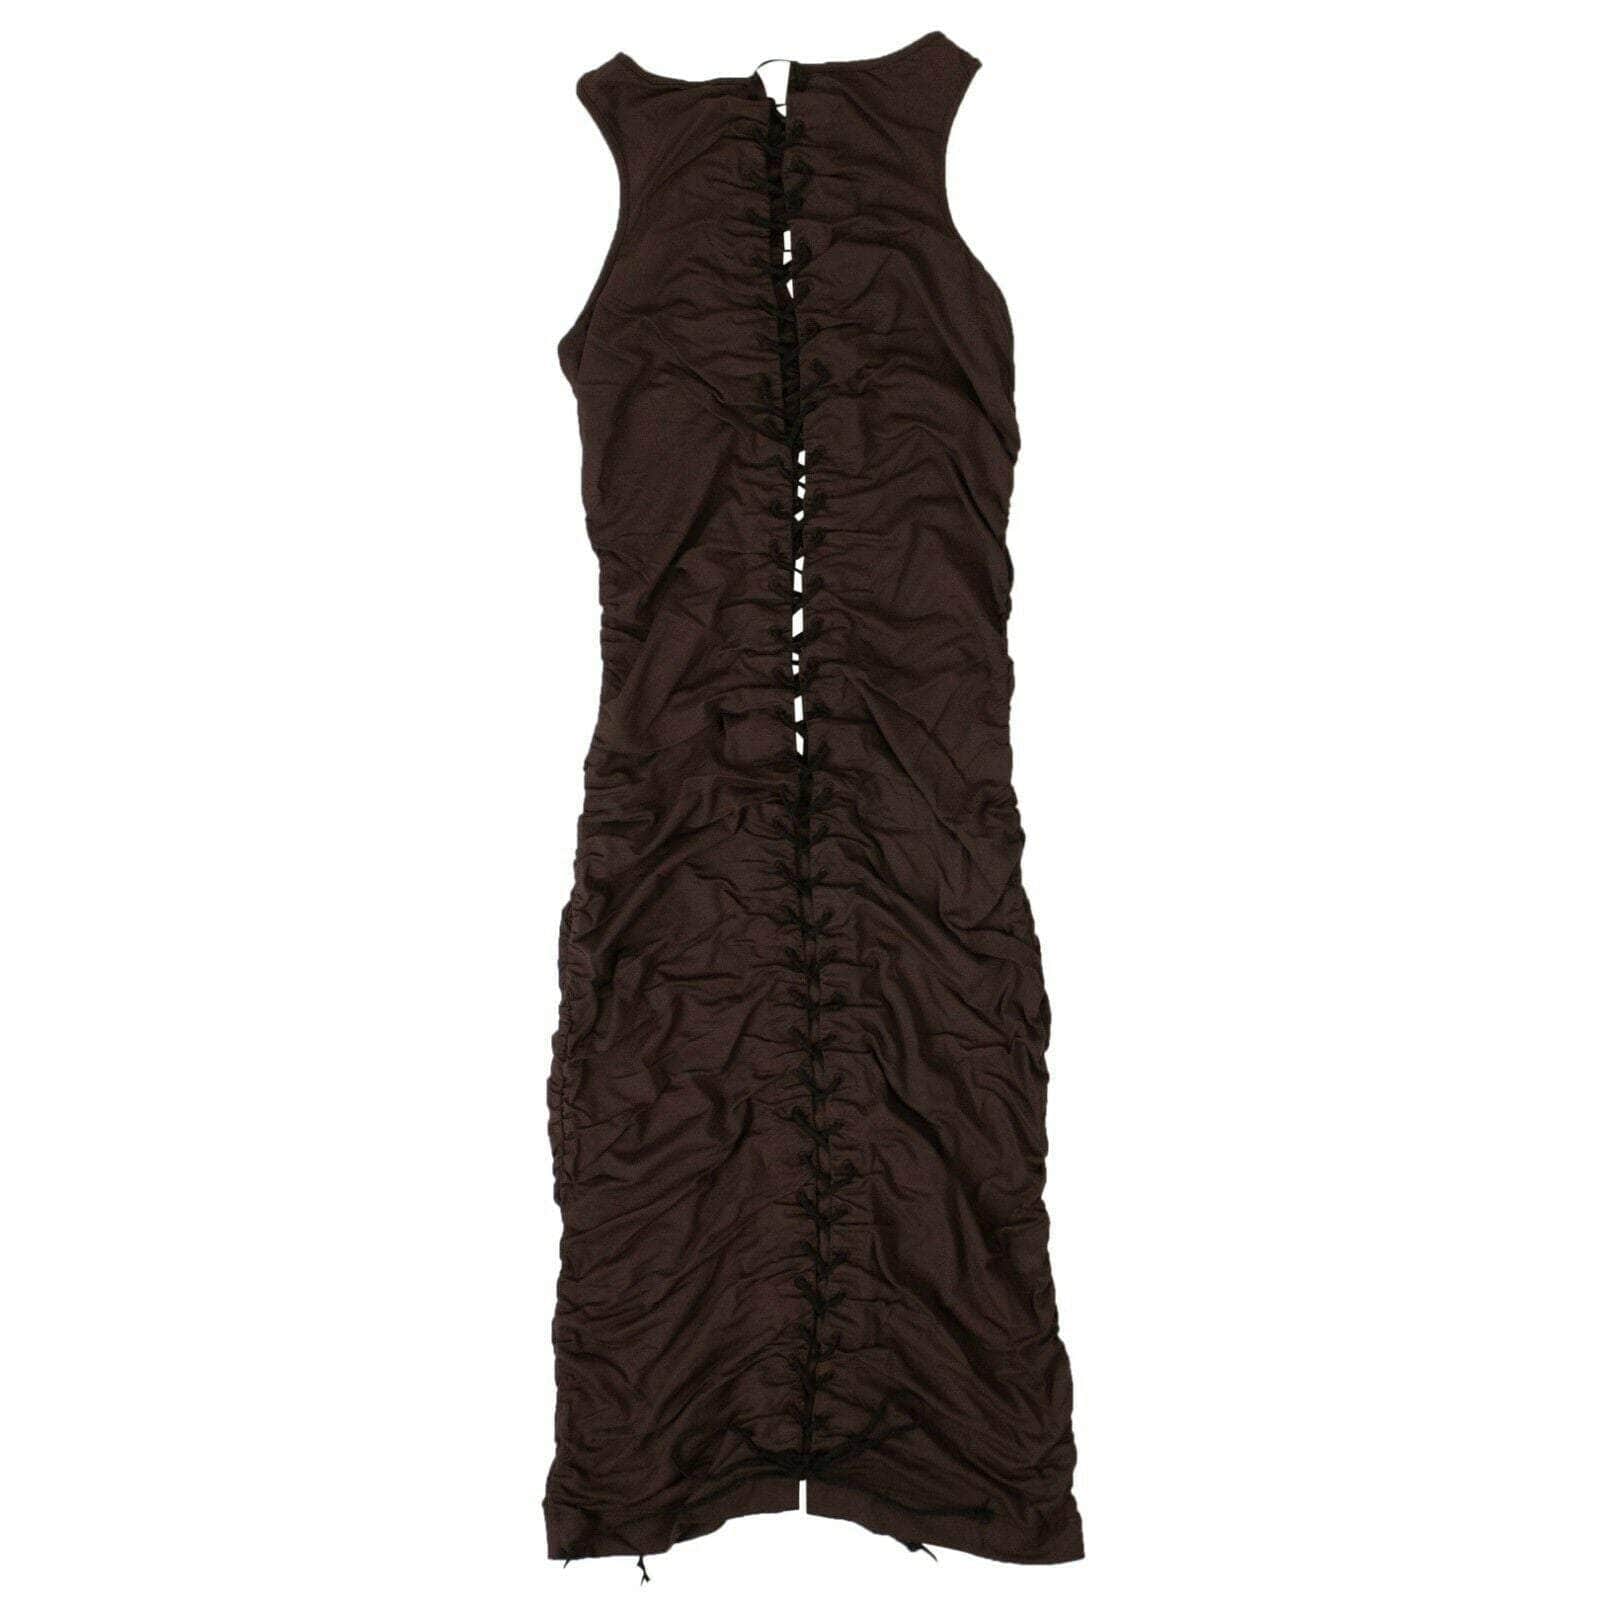 Brown Gathered Lace Up Dress - GBNY